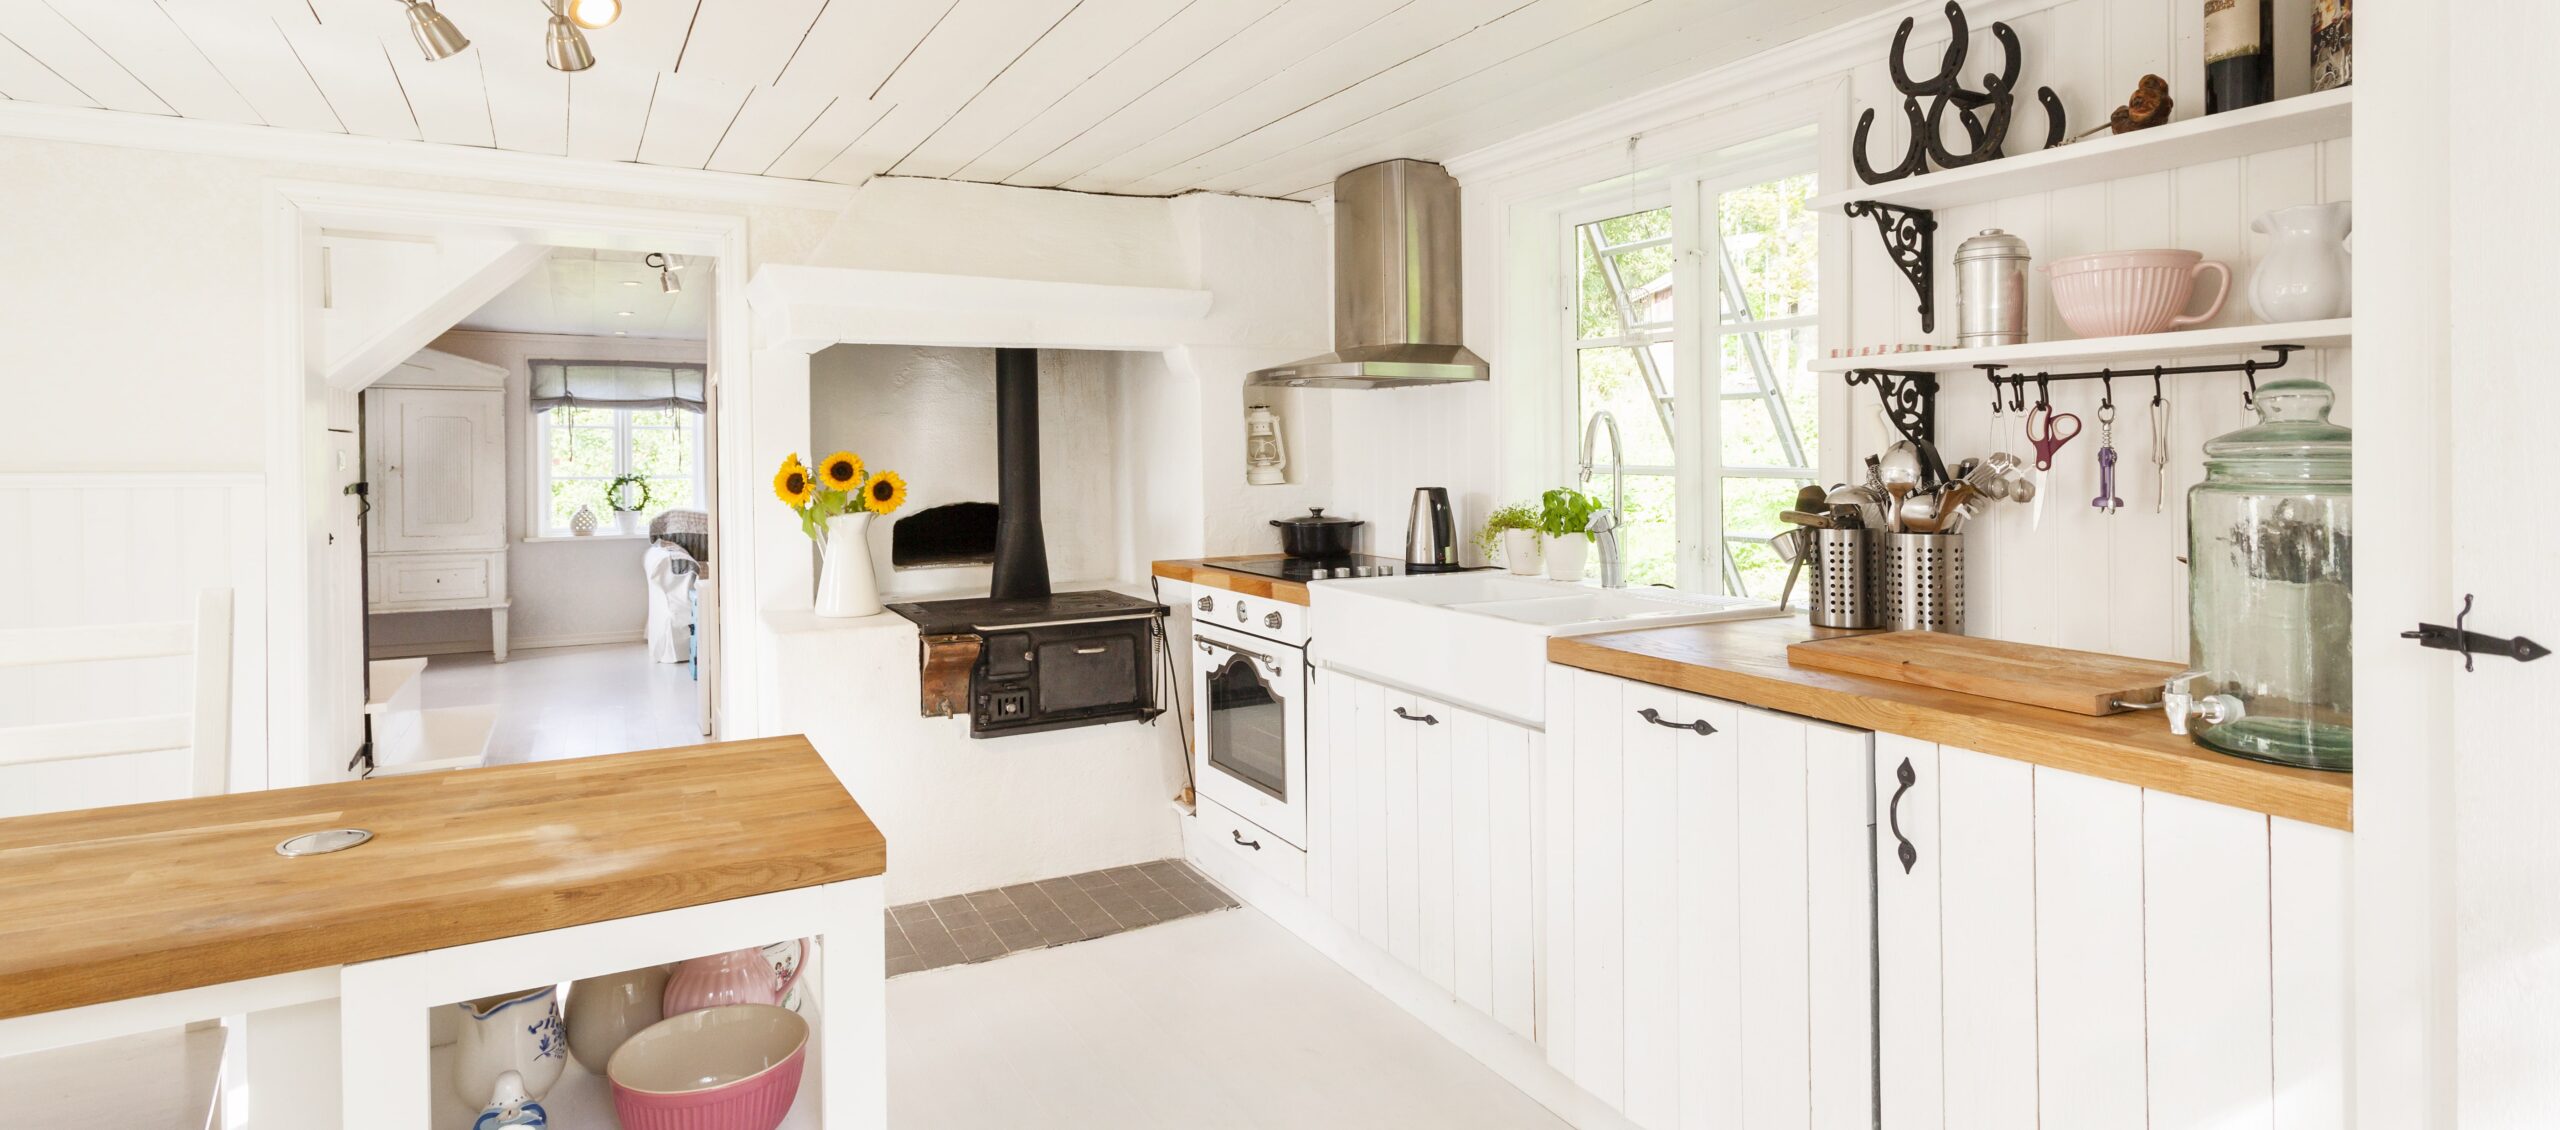 A rustic kitchen design idea with white wood cabinets and wood countertops.